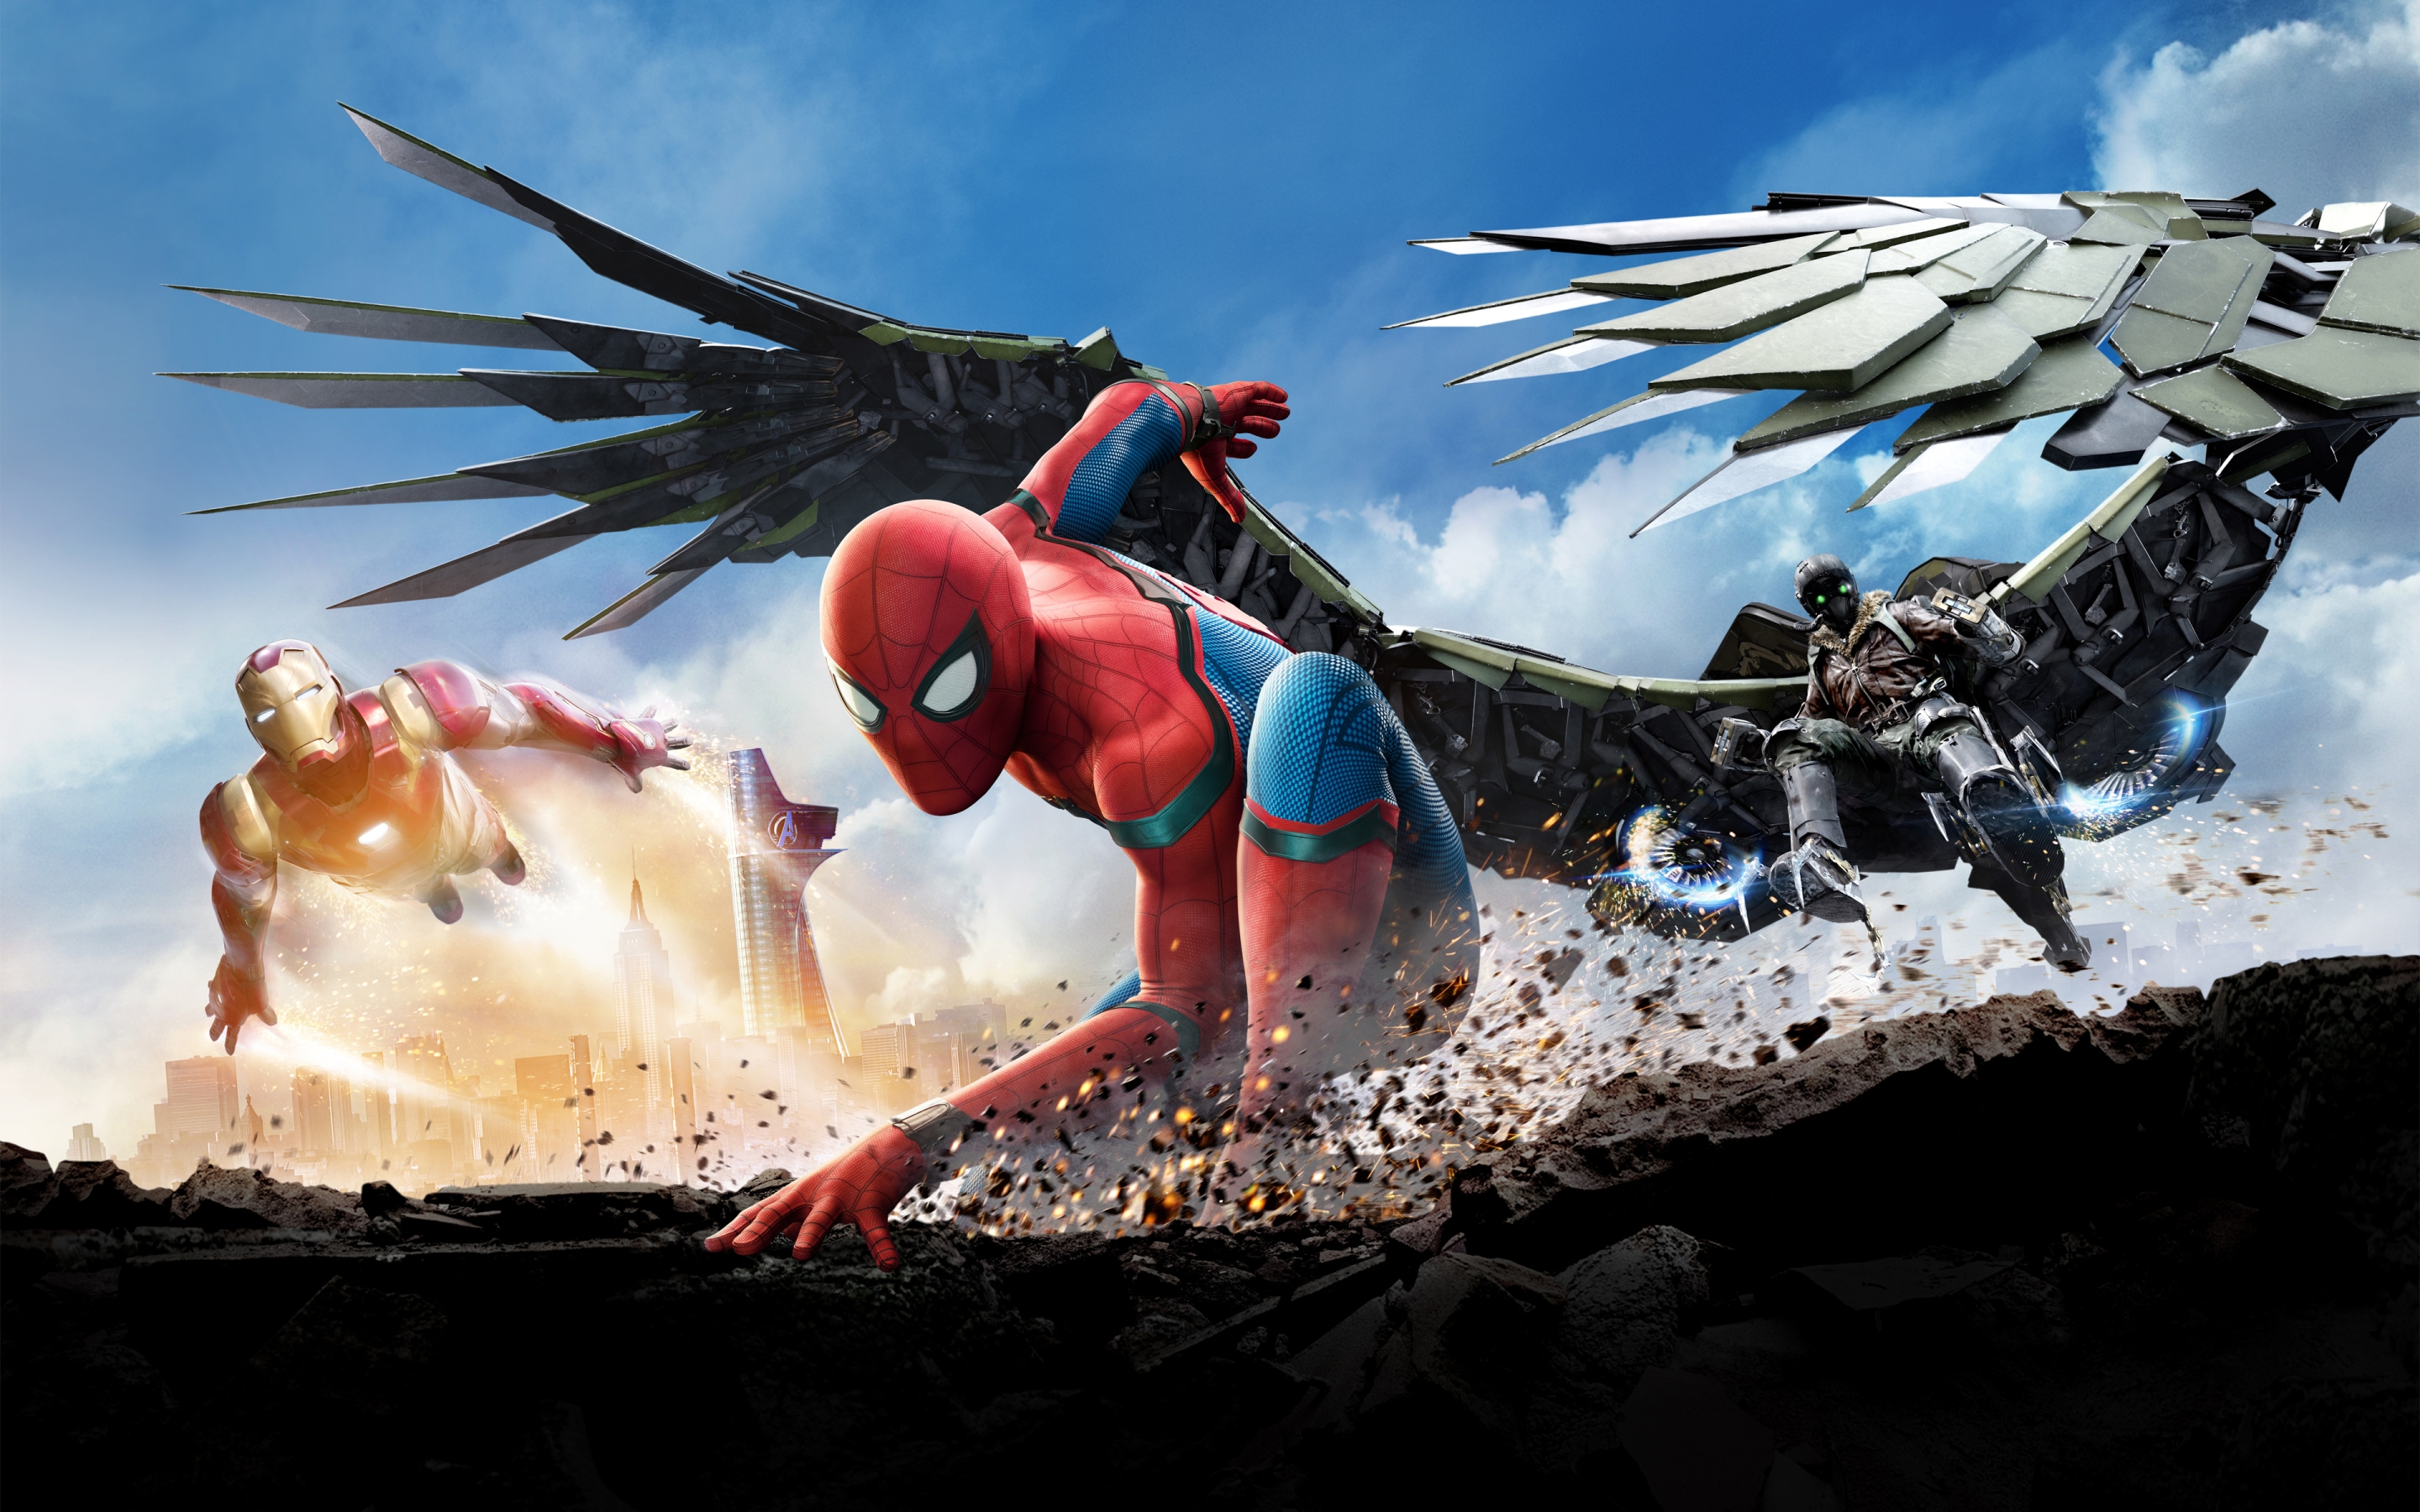 Spiderman Home Coming 2017 for 2880 x 1800 Retina Display resolution